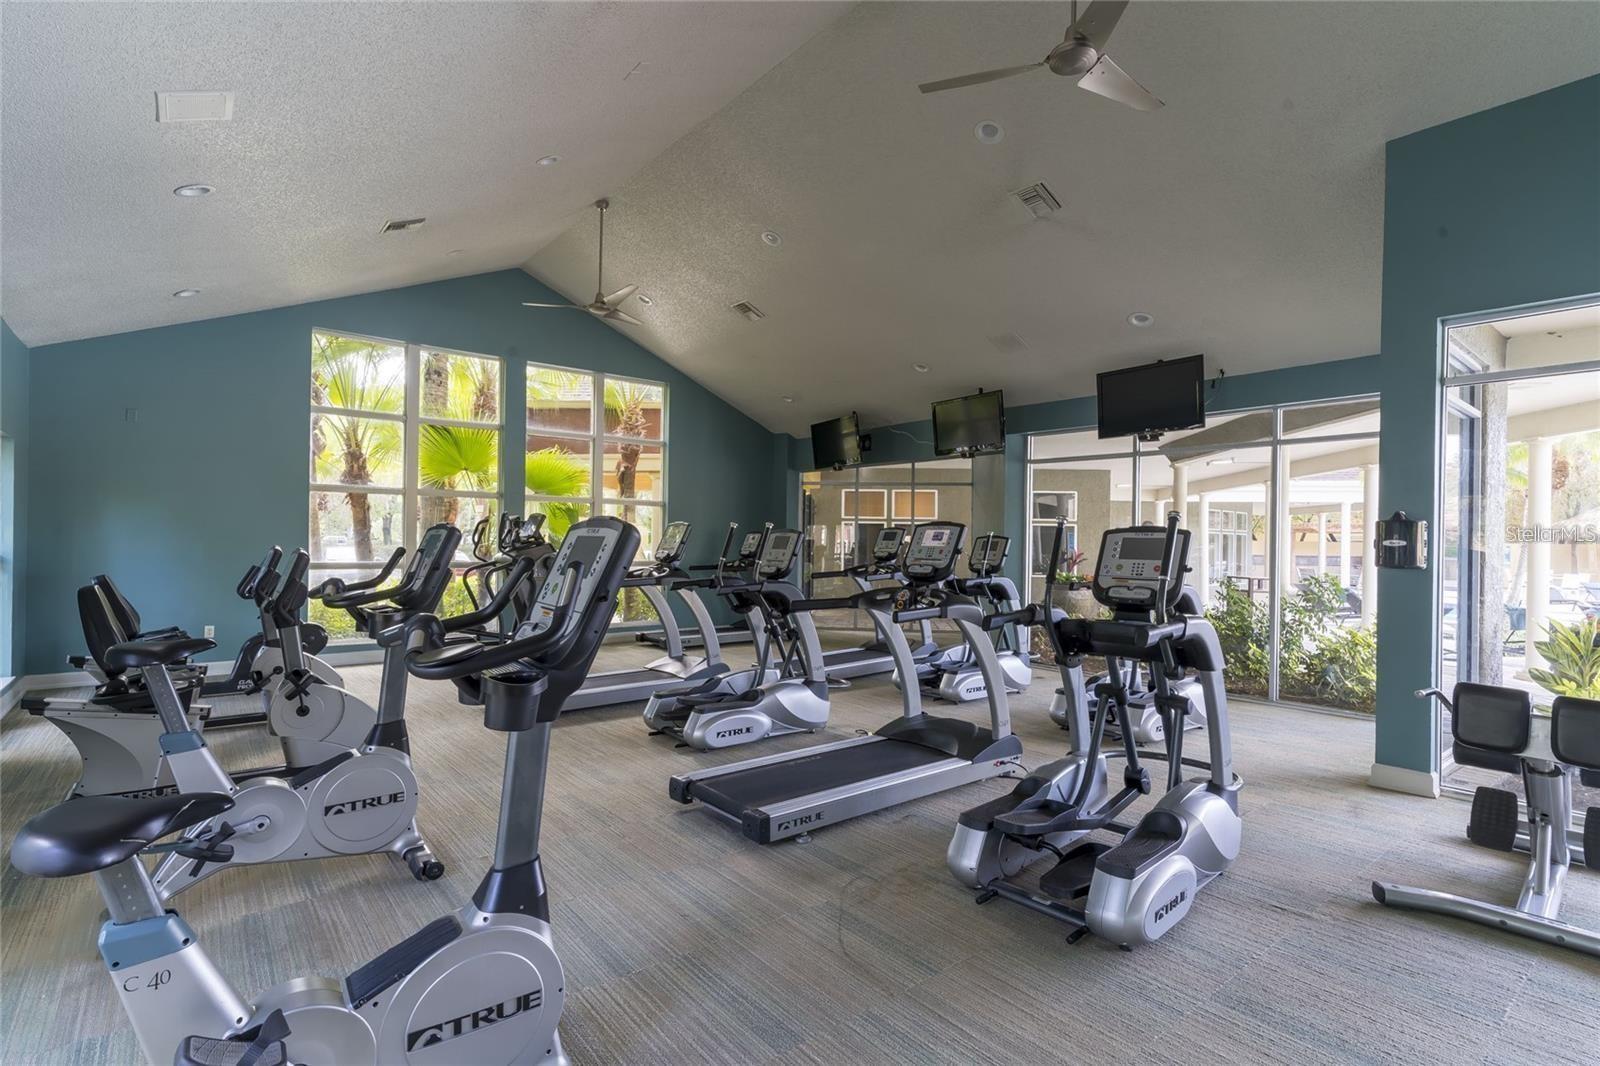 Cancel your gym membership and use your private clubhouse gym!